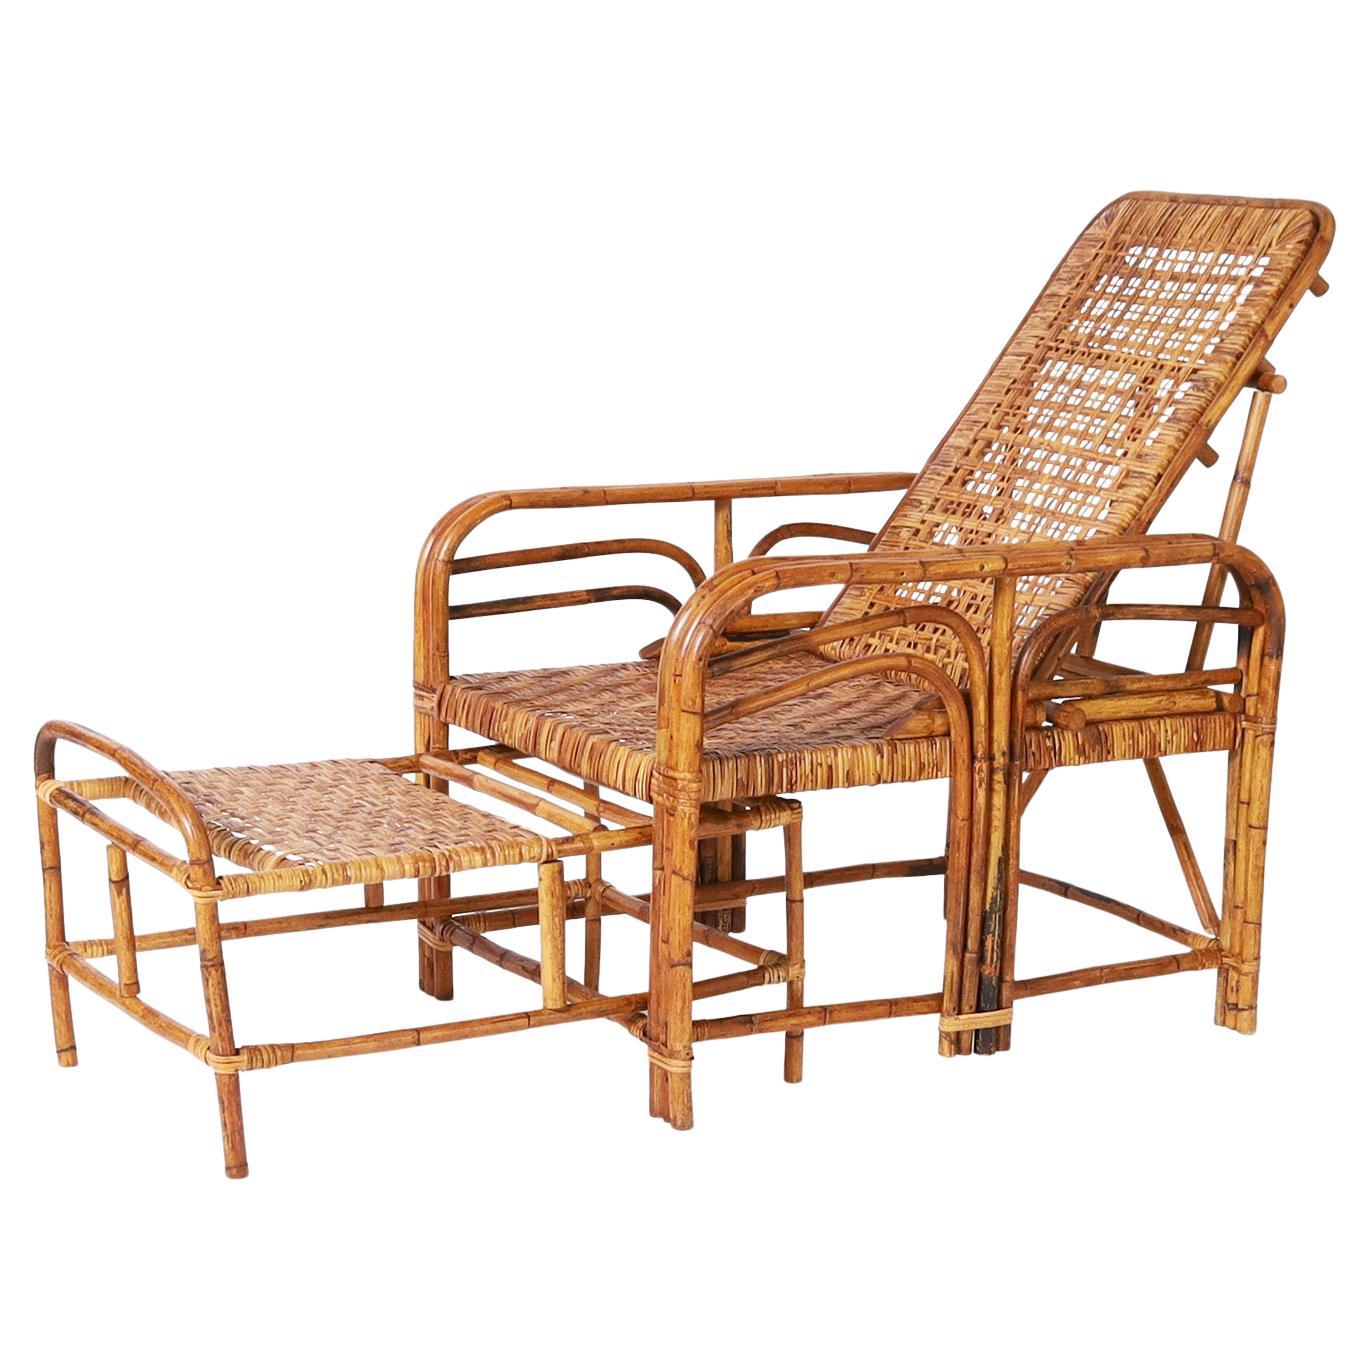 British Colonial Style Bamboo Recliner Chair with Ottoman